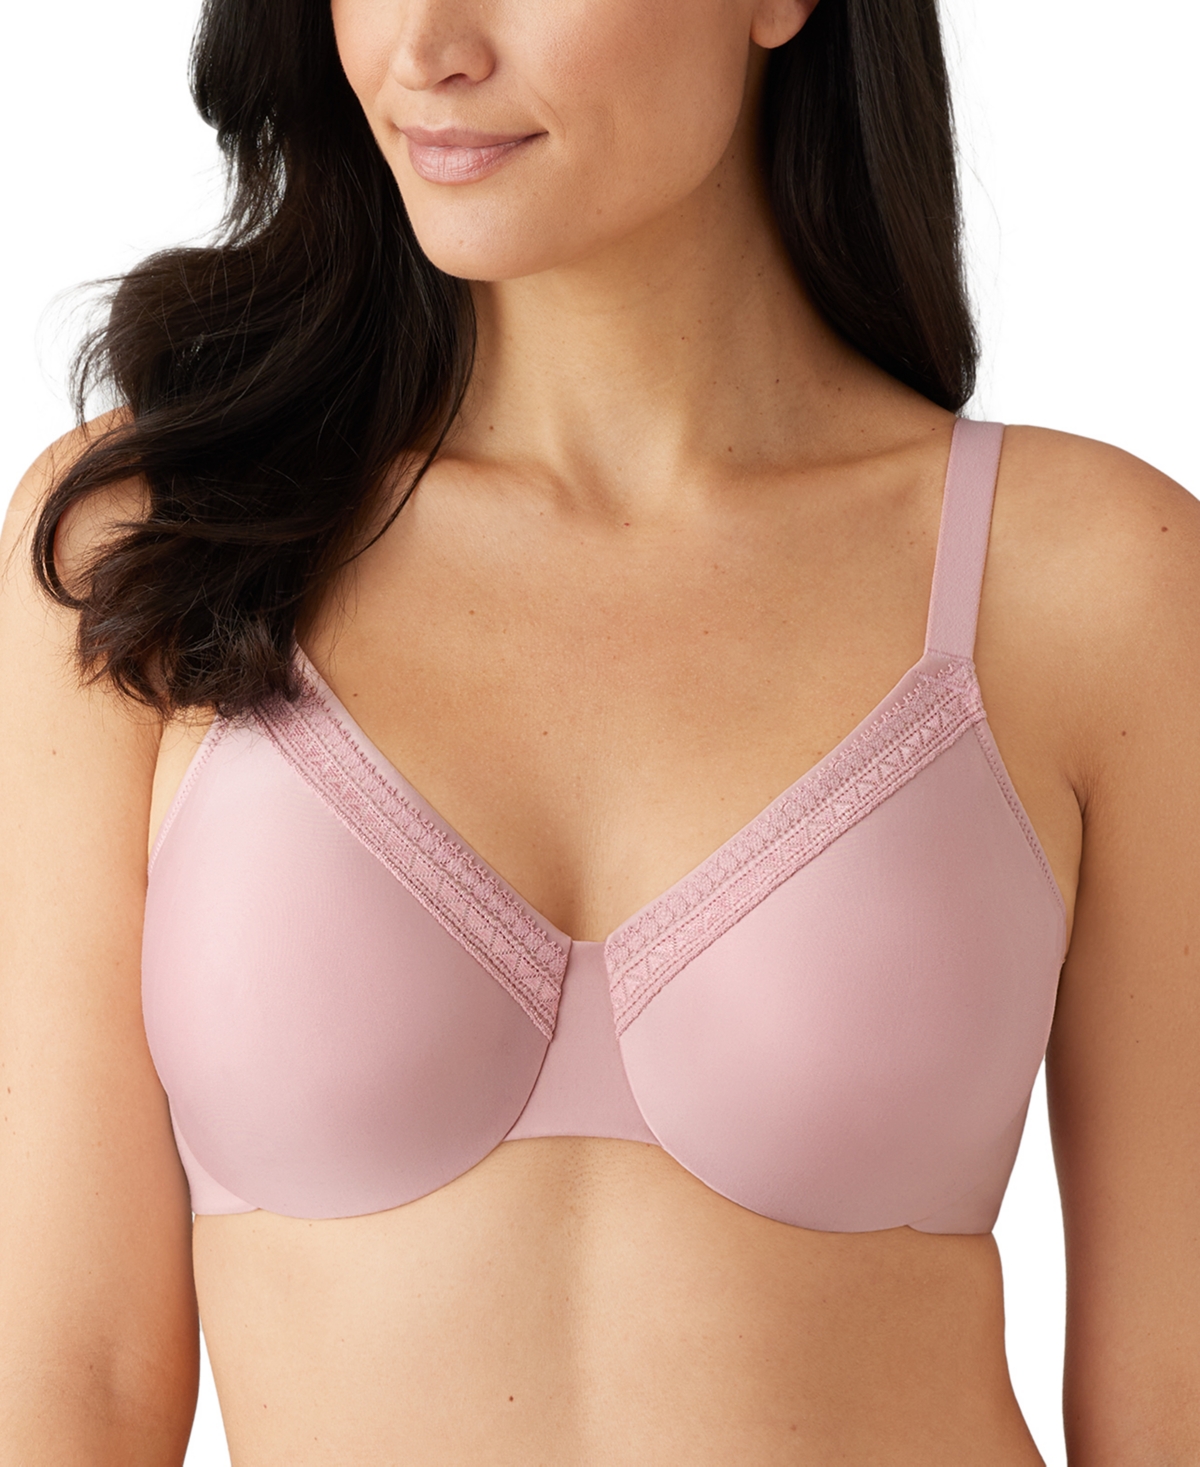 WACOAL PERFECT PRIMER UNDERWIRE BRA 855213, UP TO I CUP